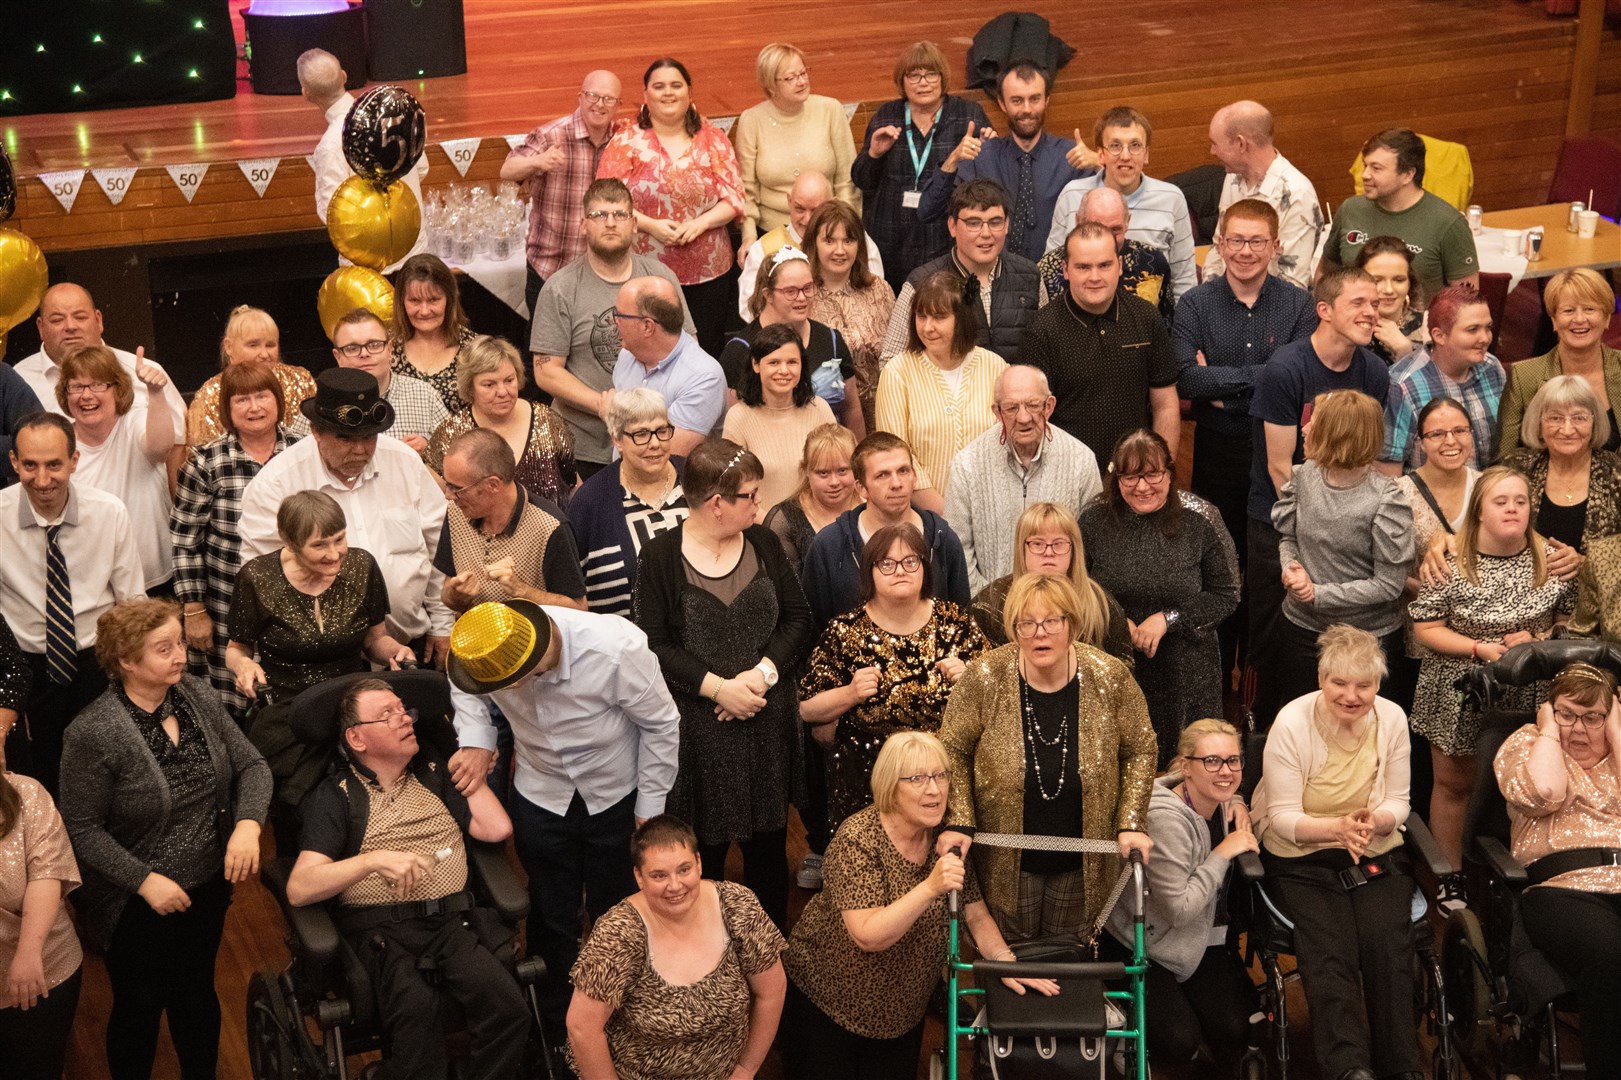 The Greyfriars Club, a social club for adults with learning disabilities in the Moray area, celebrated their 50th anniversary at the Elgin Town Hall. Picture: Daniel Forsyth